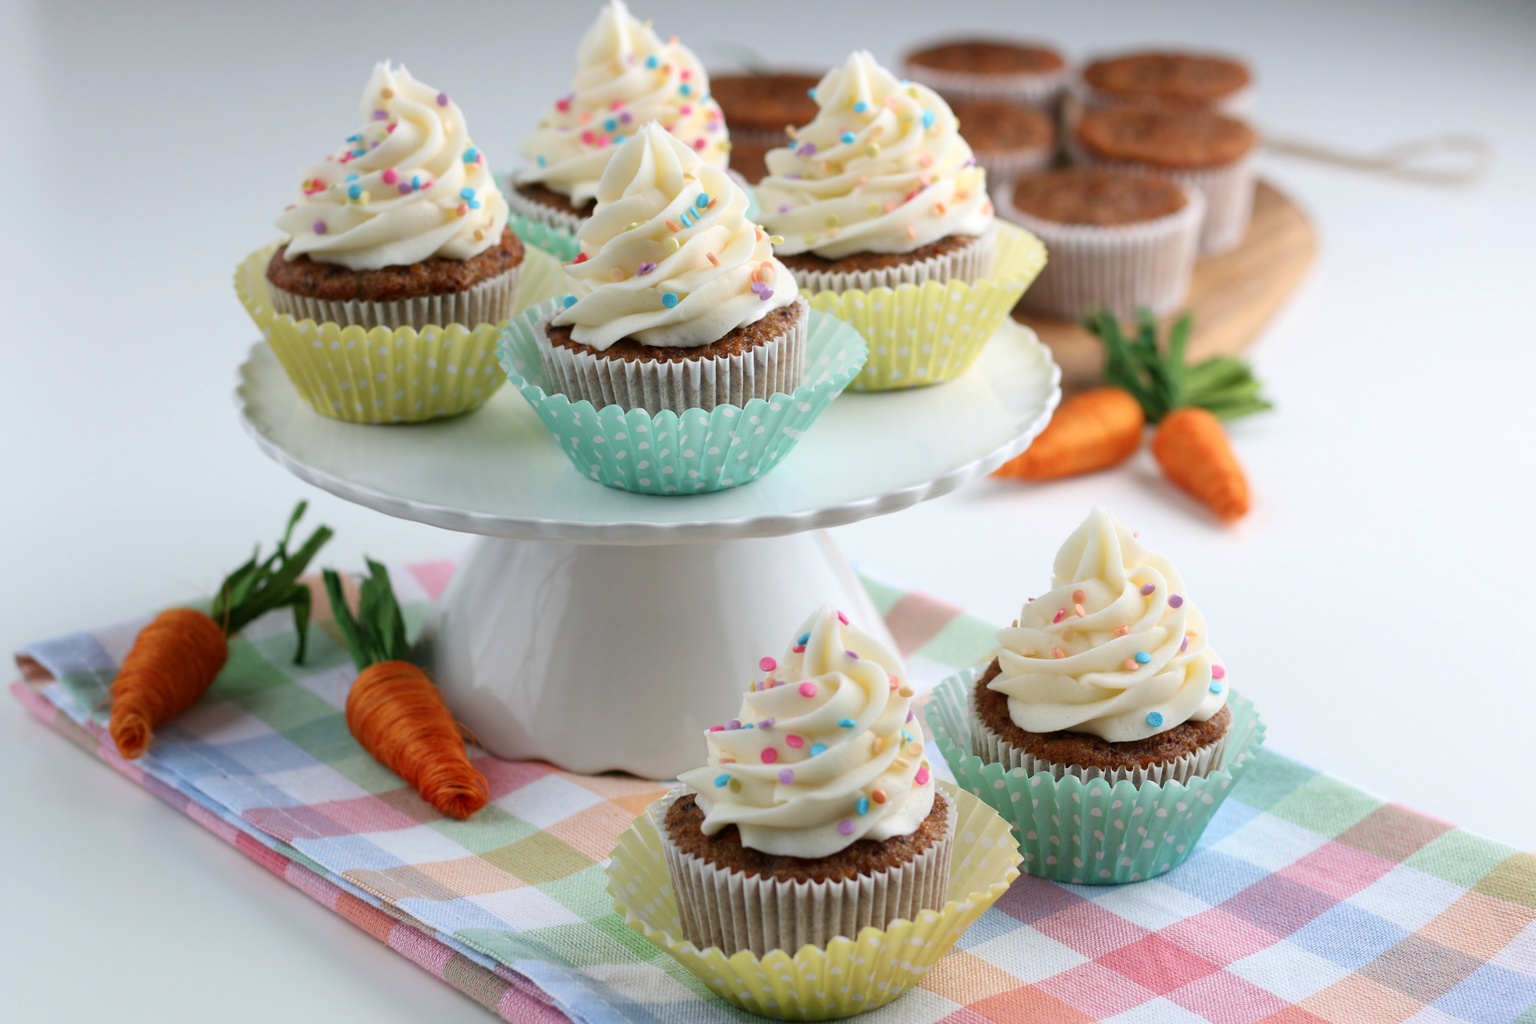 These carrot cake cupcakes are the best. And I'm not just saying that because it's my recipe. The carrot cake and cream cheese frosting ratio is a perfect balance making each and every bite mouth-watering good. I'm literally craving them right now as I'm sharing this recipe with each and every one of you.  If you're looking for a homemade cupcake recipe that everyone is going to love, these Carrot Cake cupcakes need to be on your radar. 